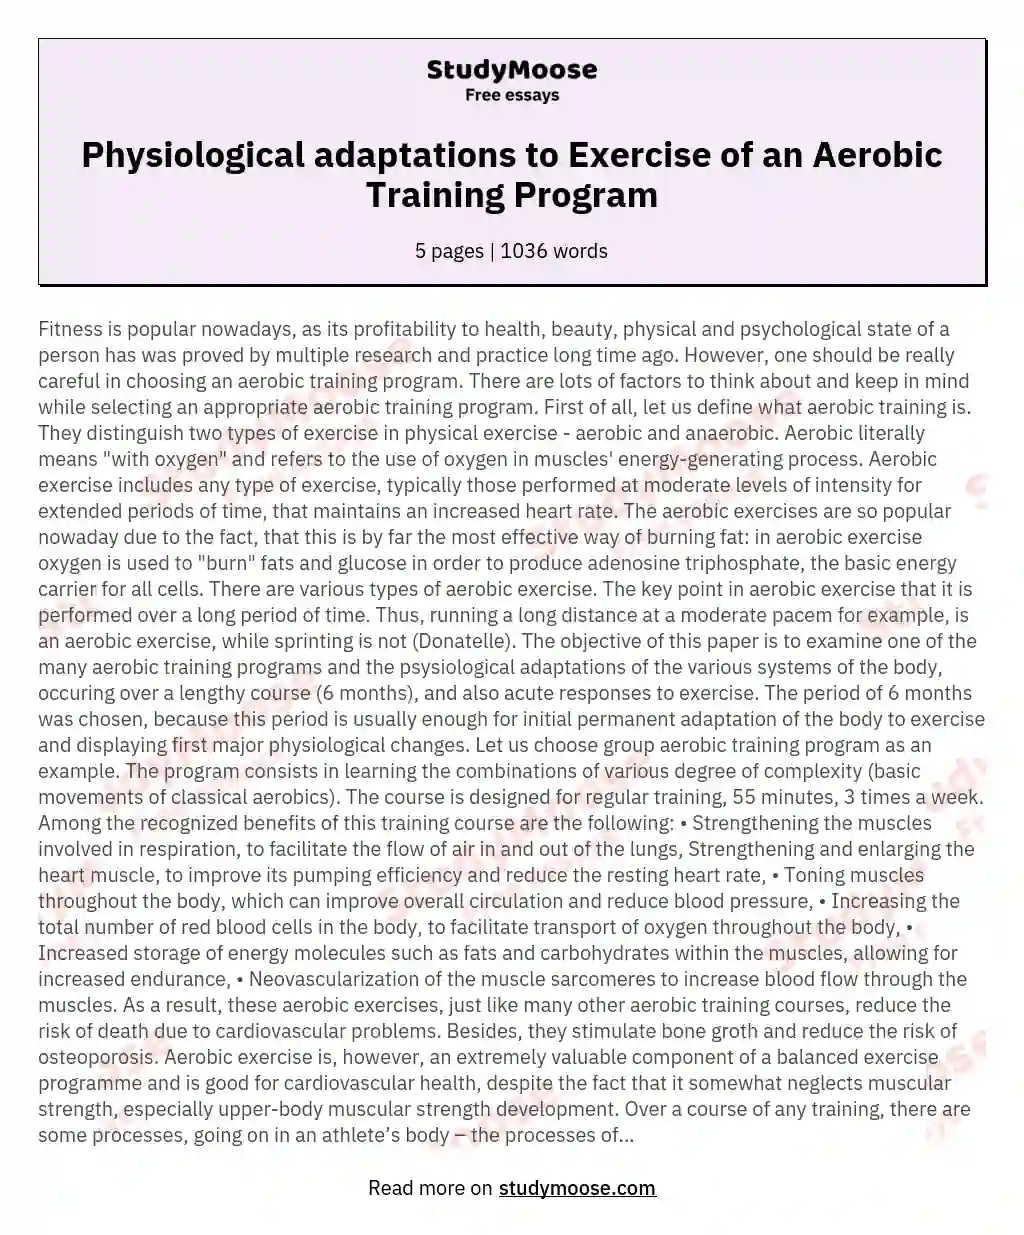 Physiological adaptations to Exercise of an Aerobic Training Program essay